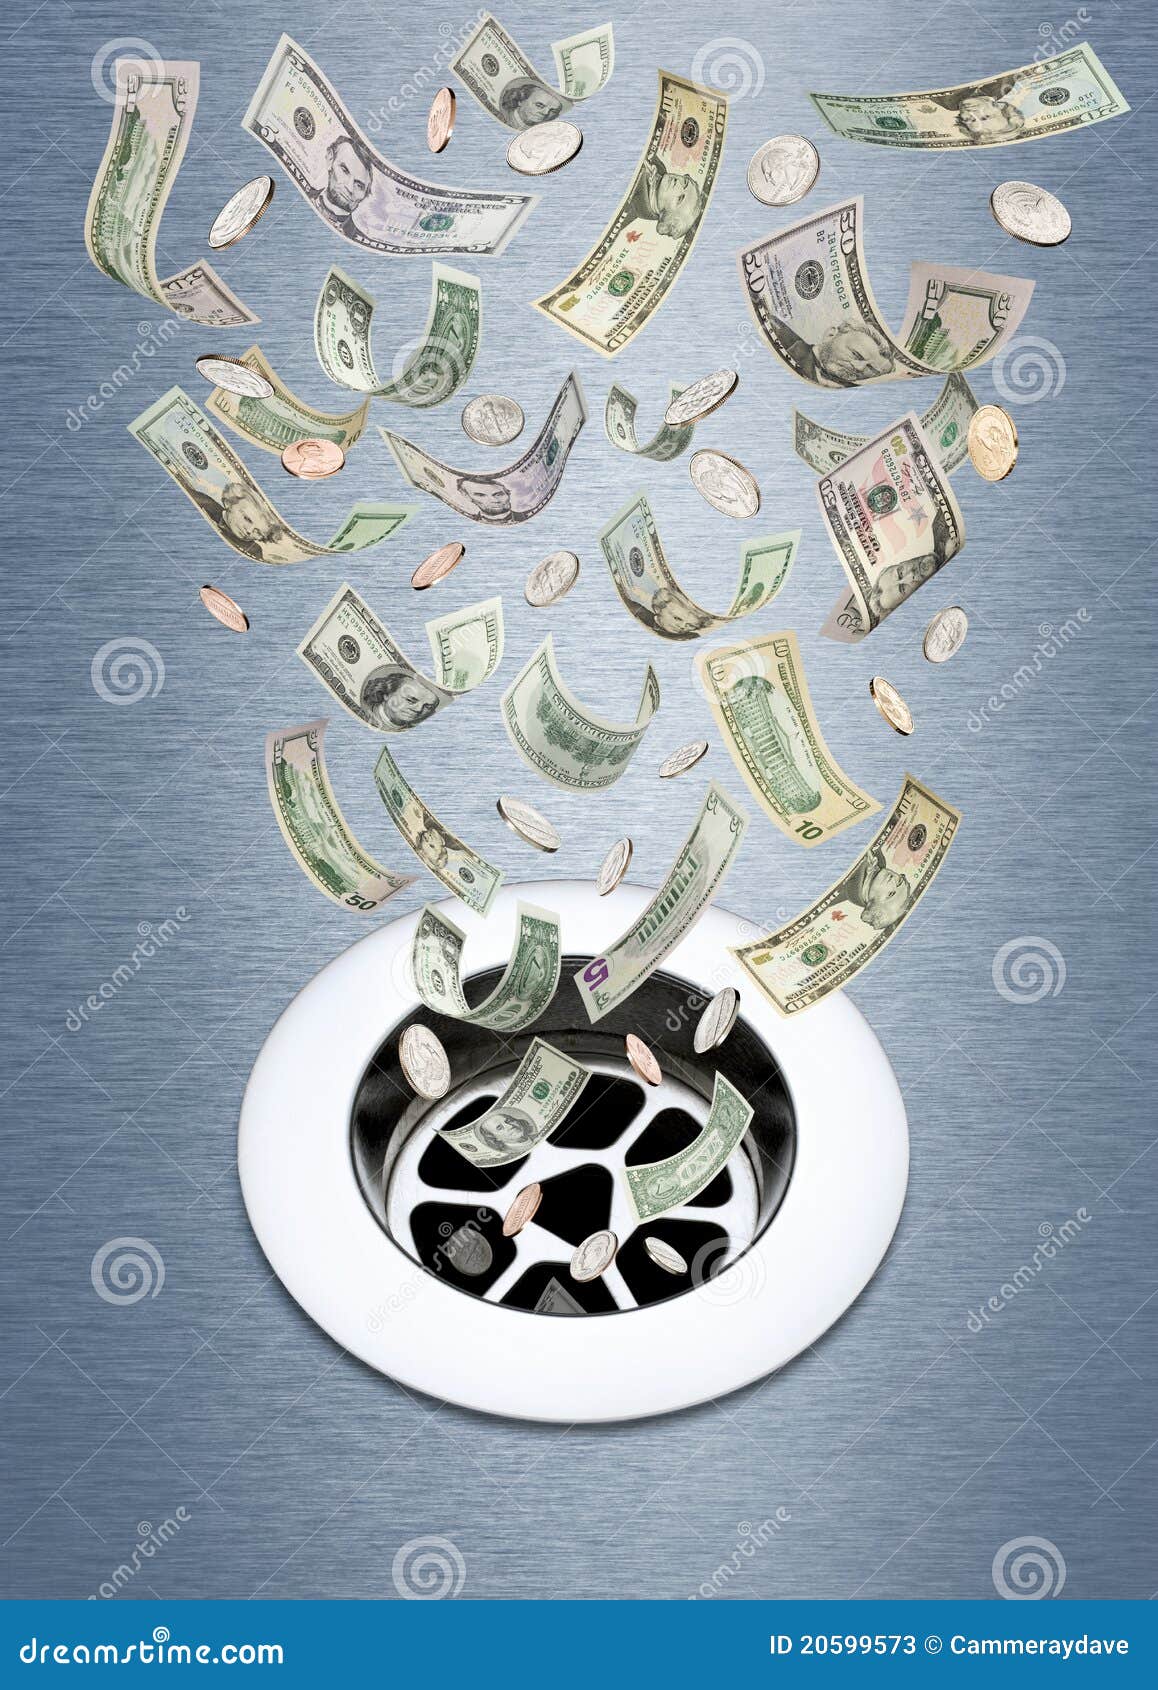 clipart of money going down the drain - photo #26